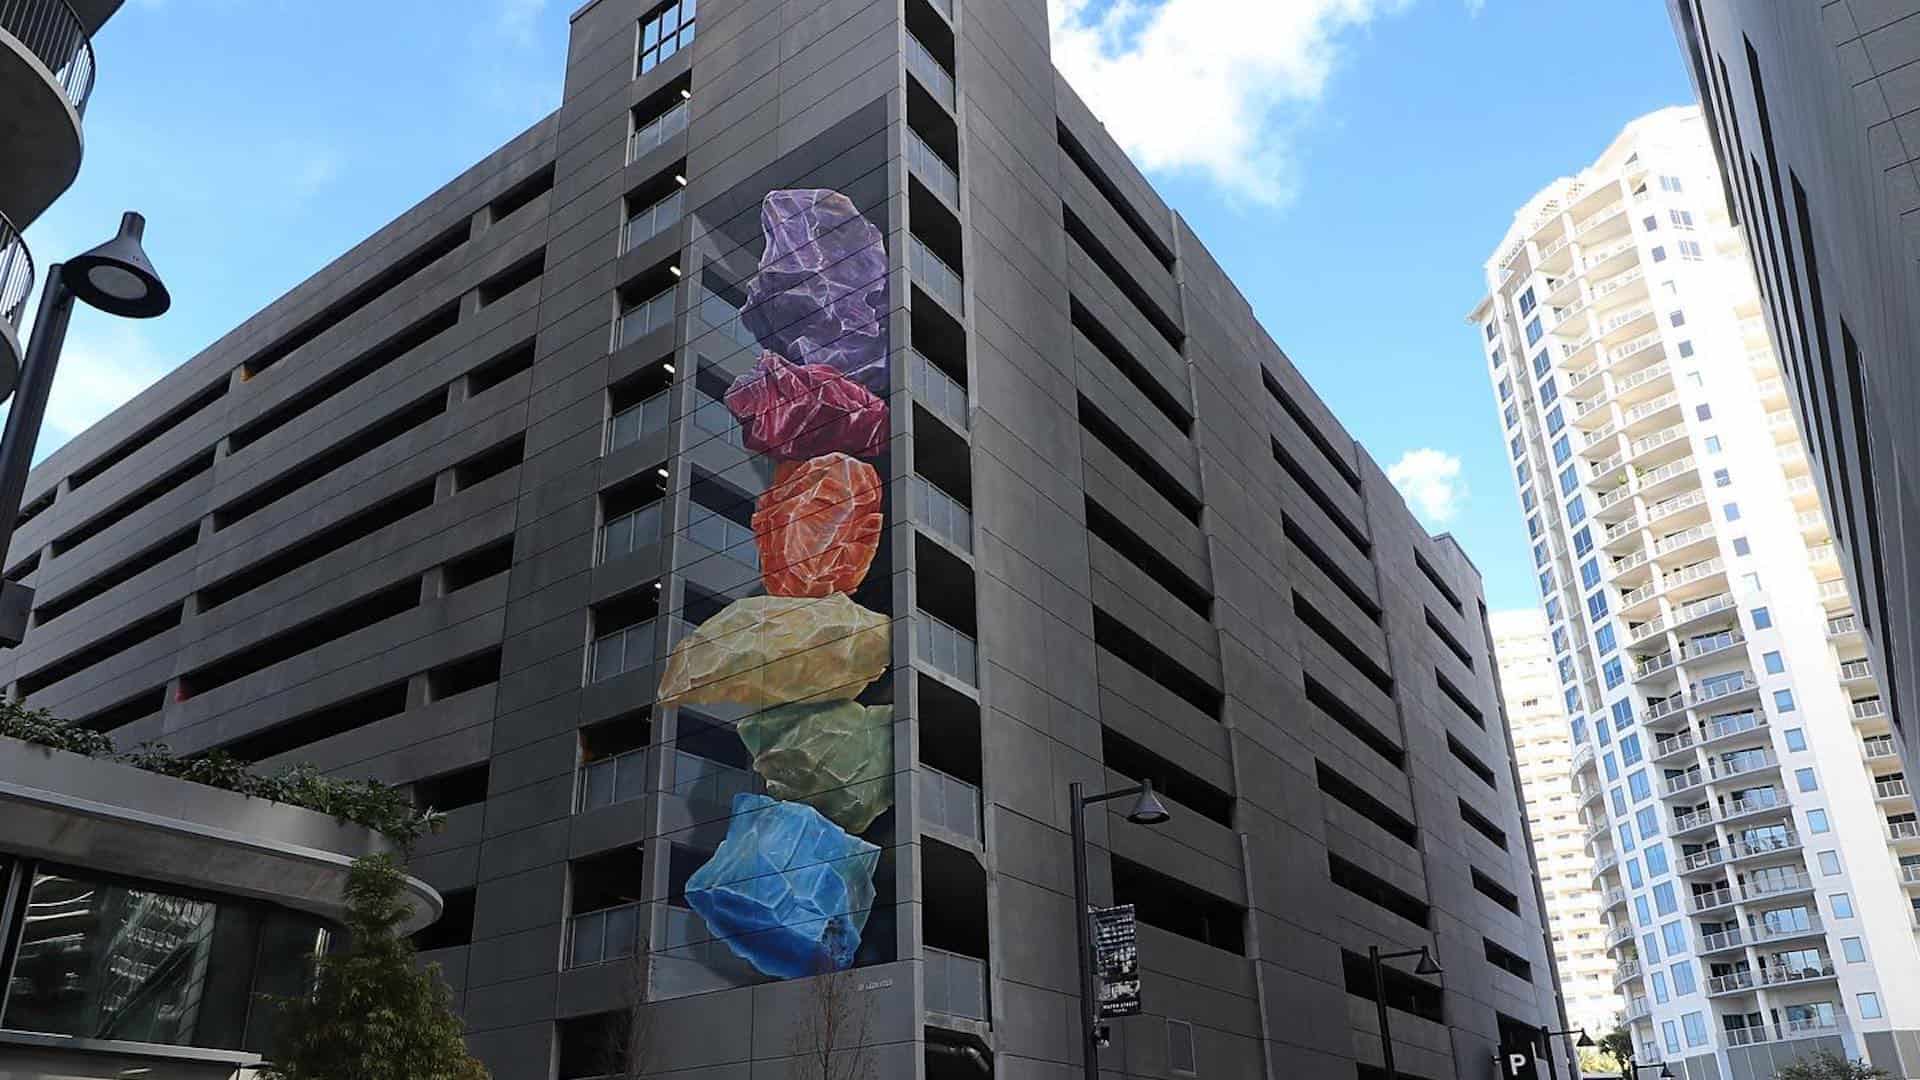 Augmented reality mural by Leon Keer arrives in Water Street Tampa